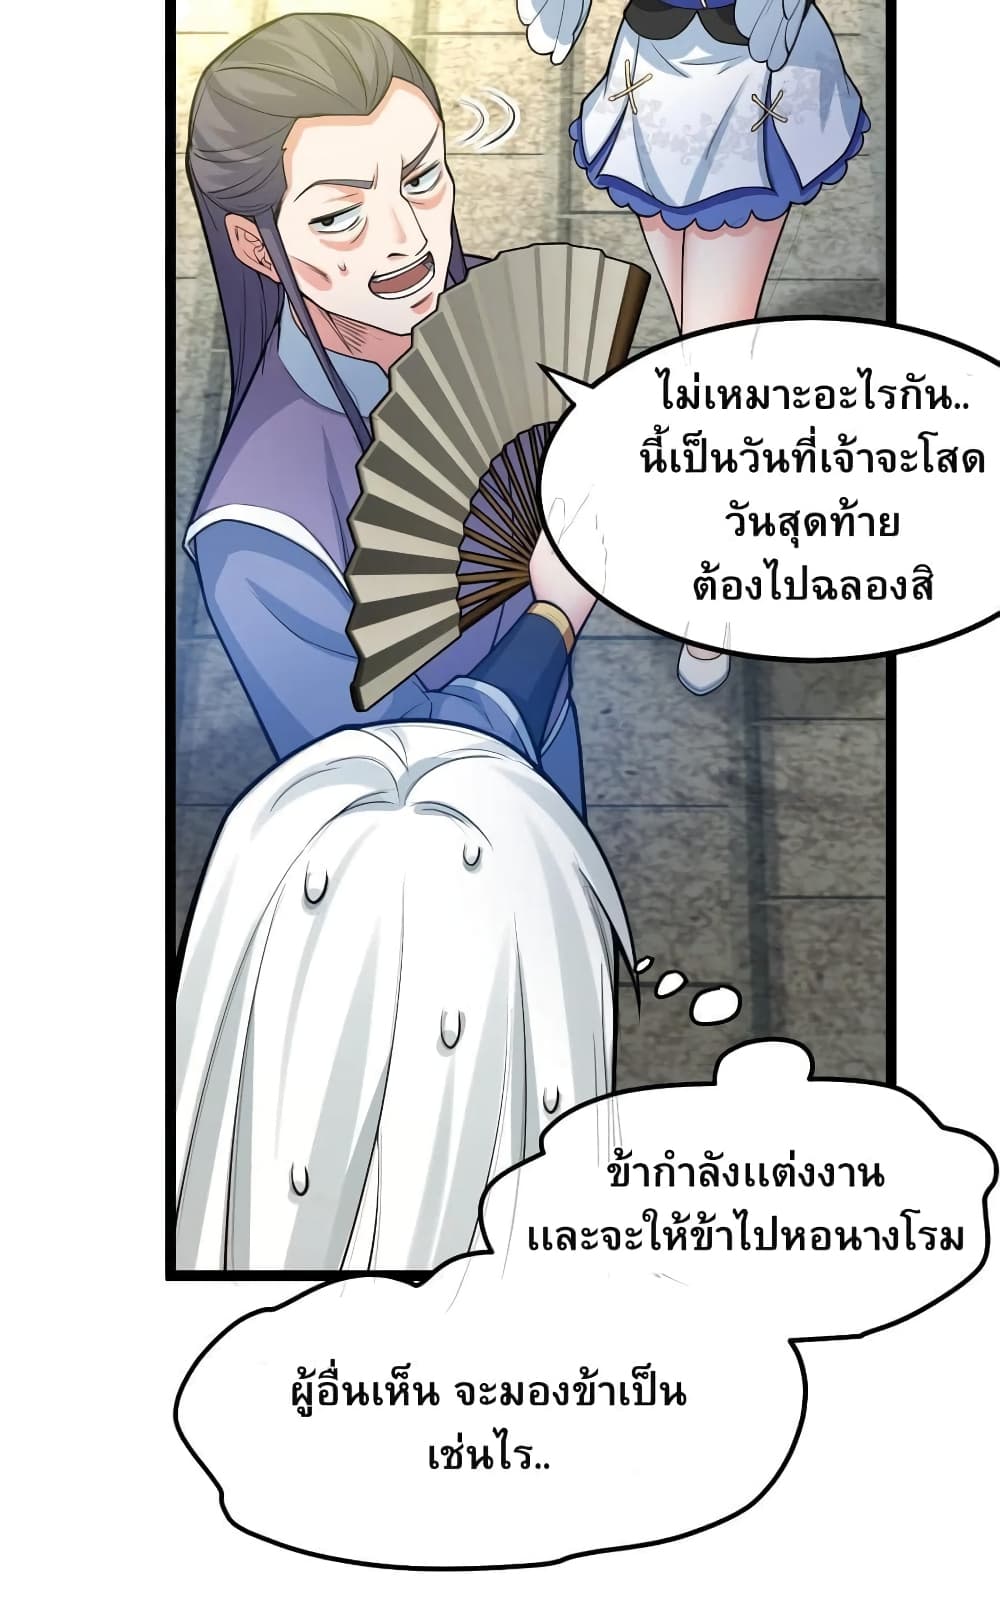 Godsian Masian from Another World ตอนที่ 104 (5)